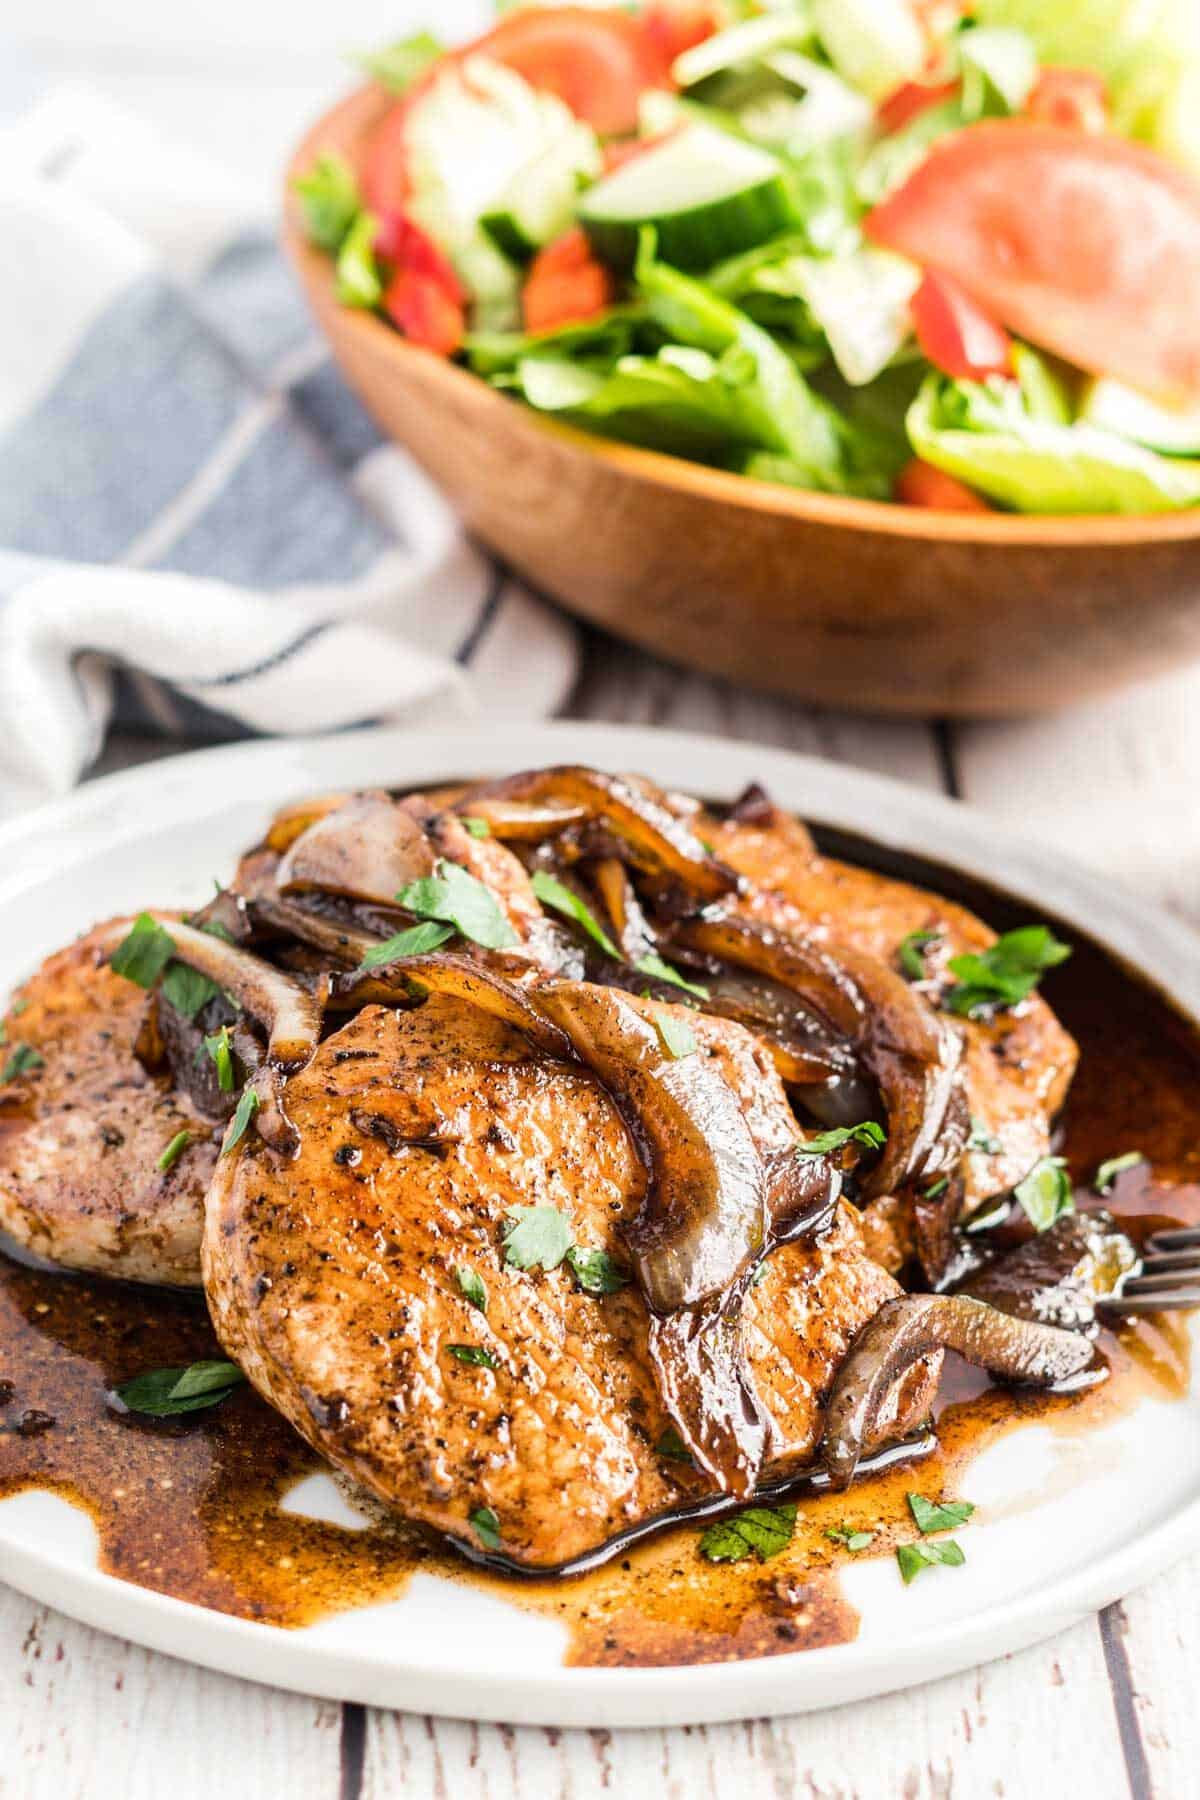 Balsamic Glazed Pork Chops on a white plate, with a bowl of salad